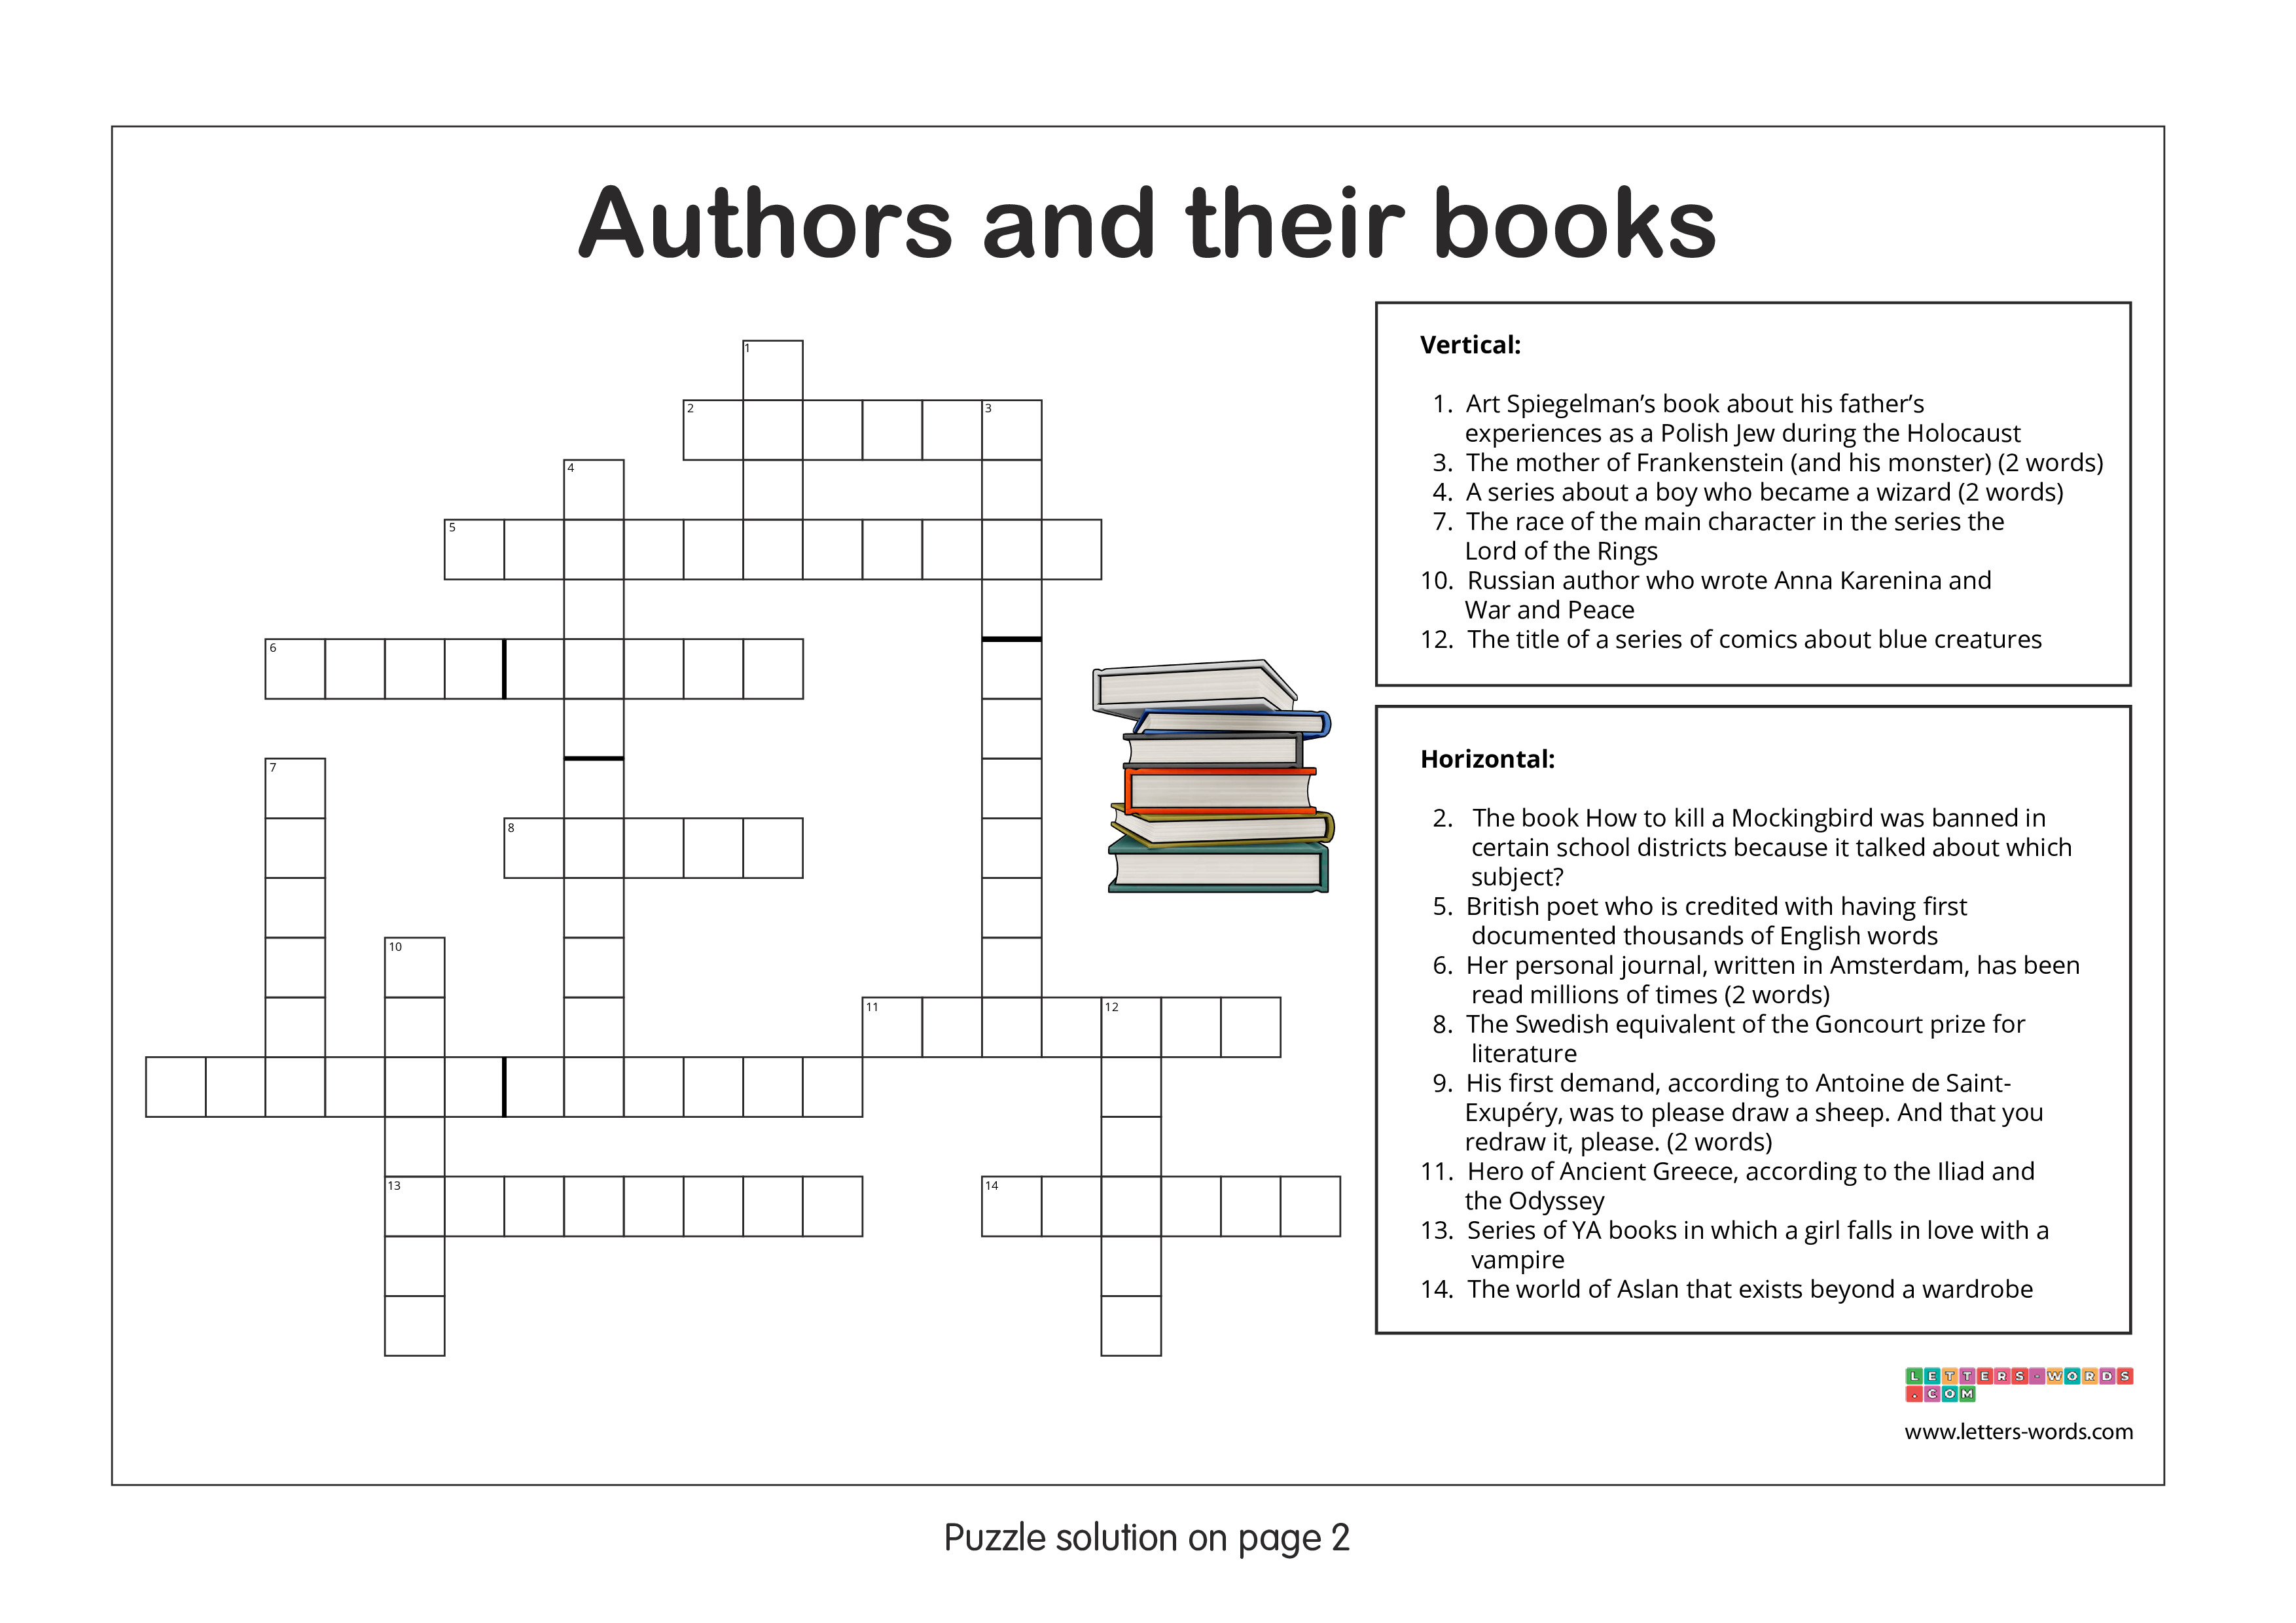 Crossword puzzles for children aged 12+ - Authors and their Books